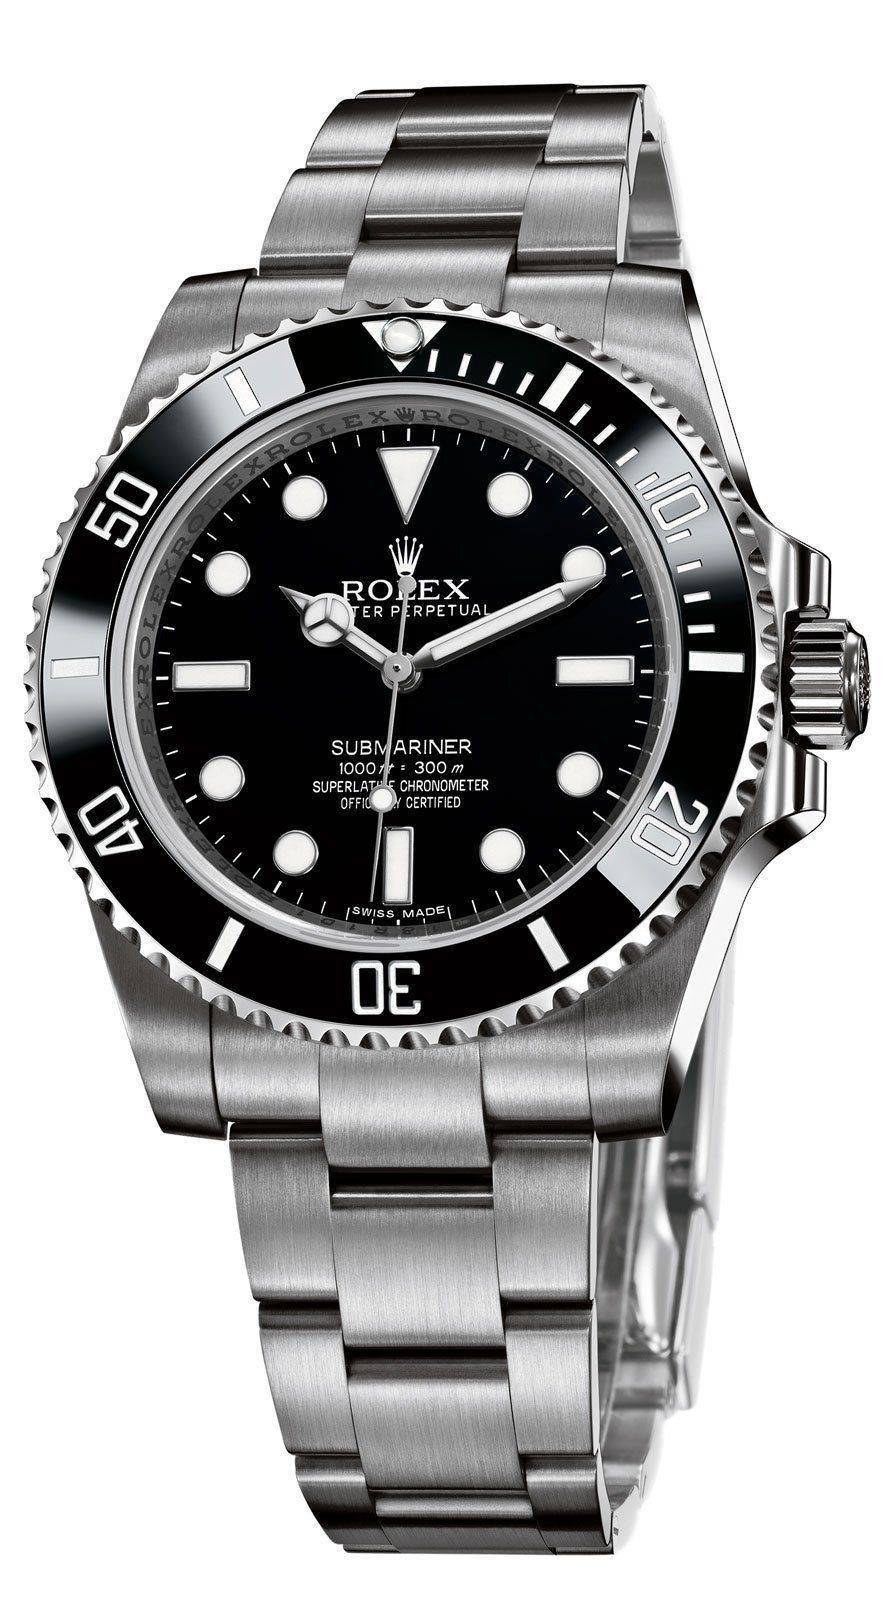 All-New-Rolex-Submariner-No-Date-Reference-114060.jpg